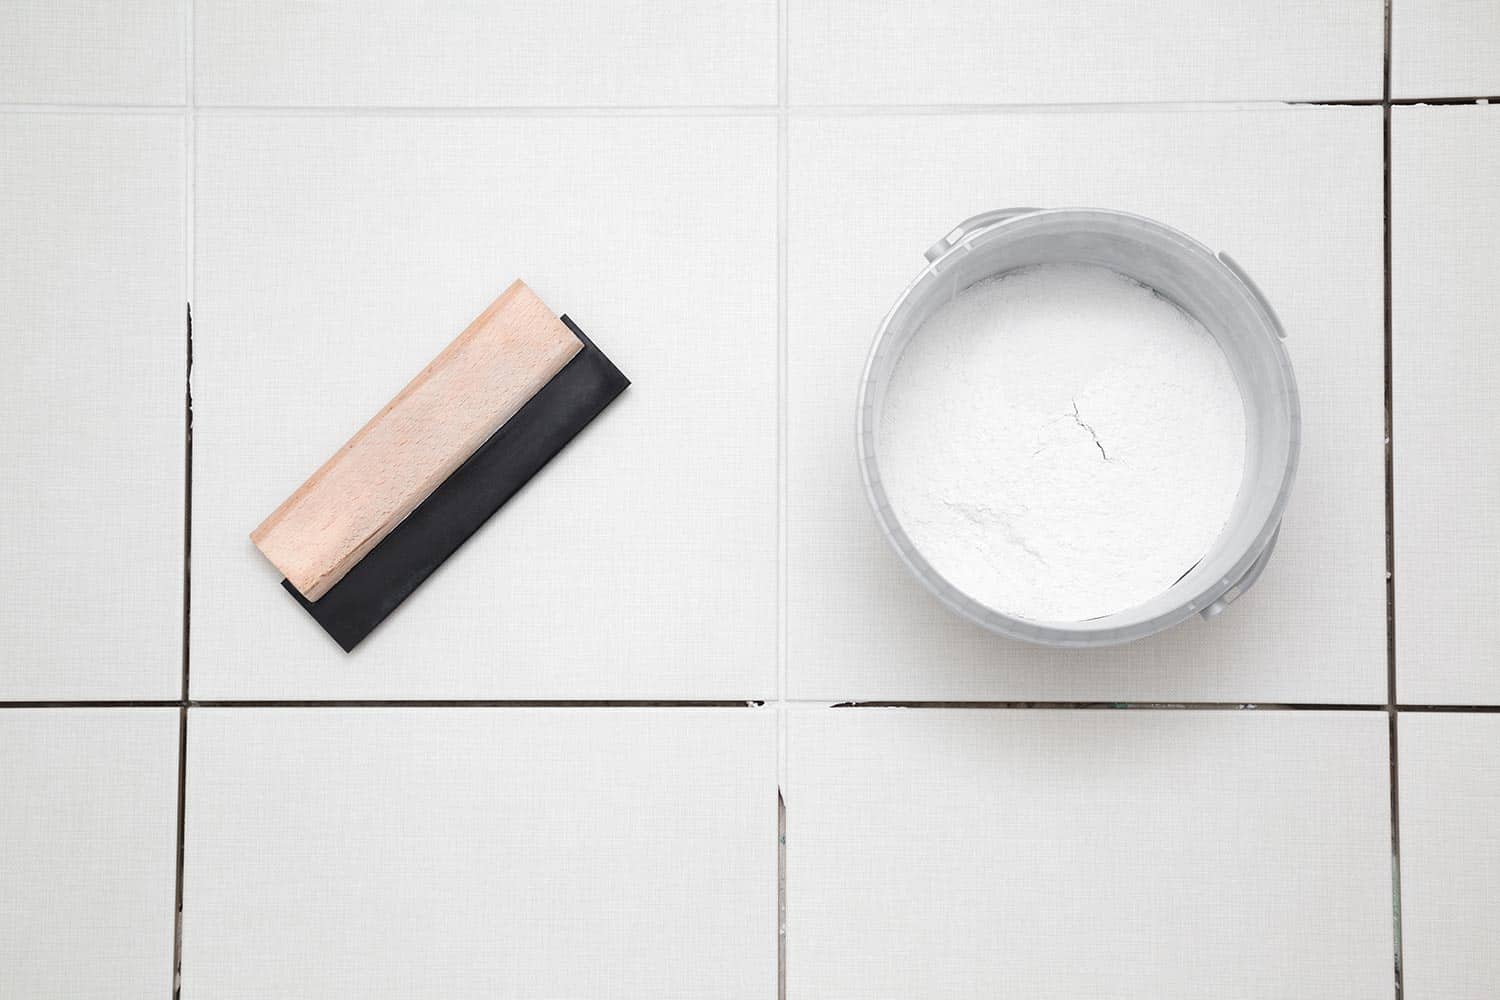 Rubber trowel and container with powder of grouting paste for ceramic tile seams on floor